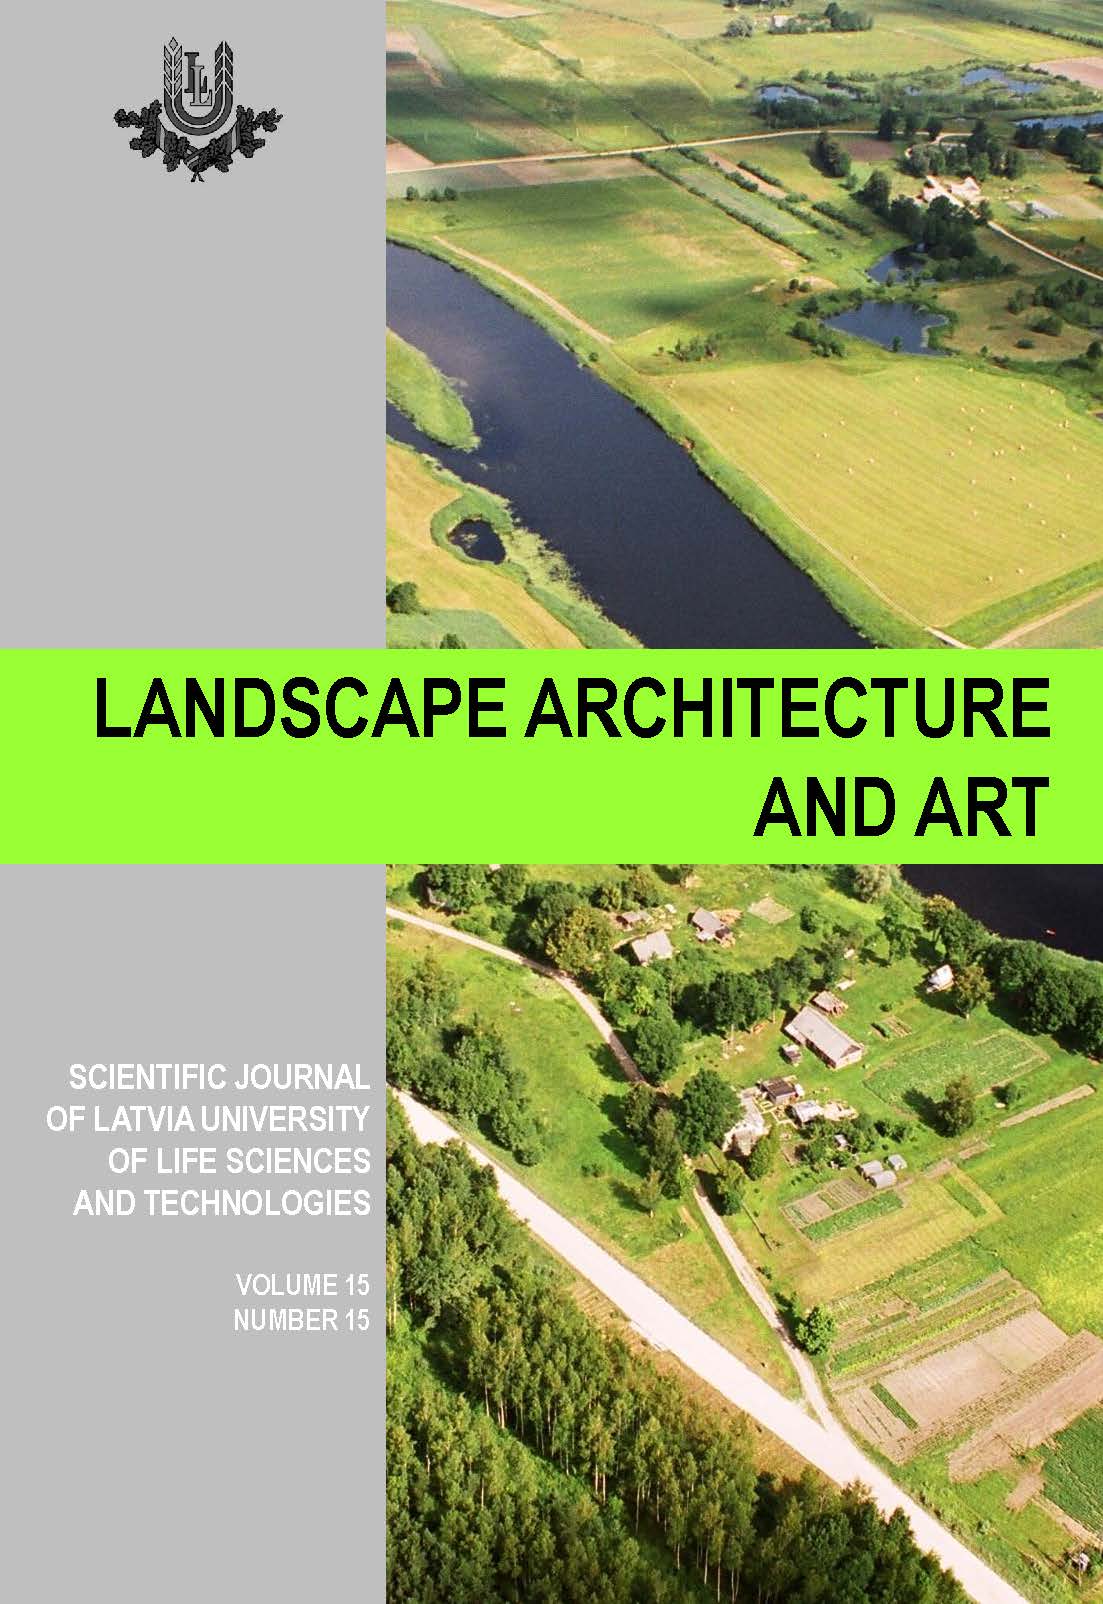 Landscape Architecture and Art, Volume 15, Number 15